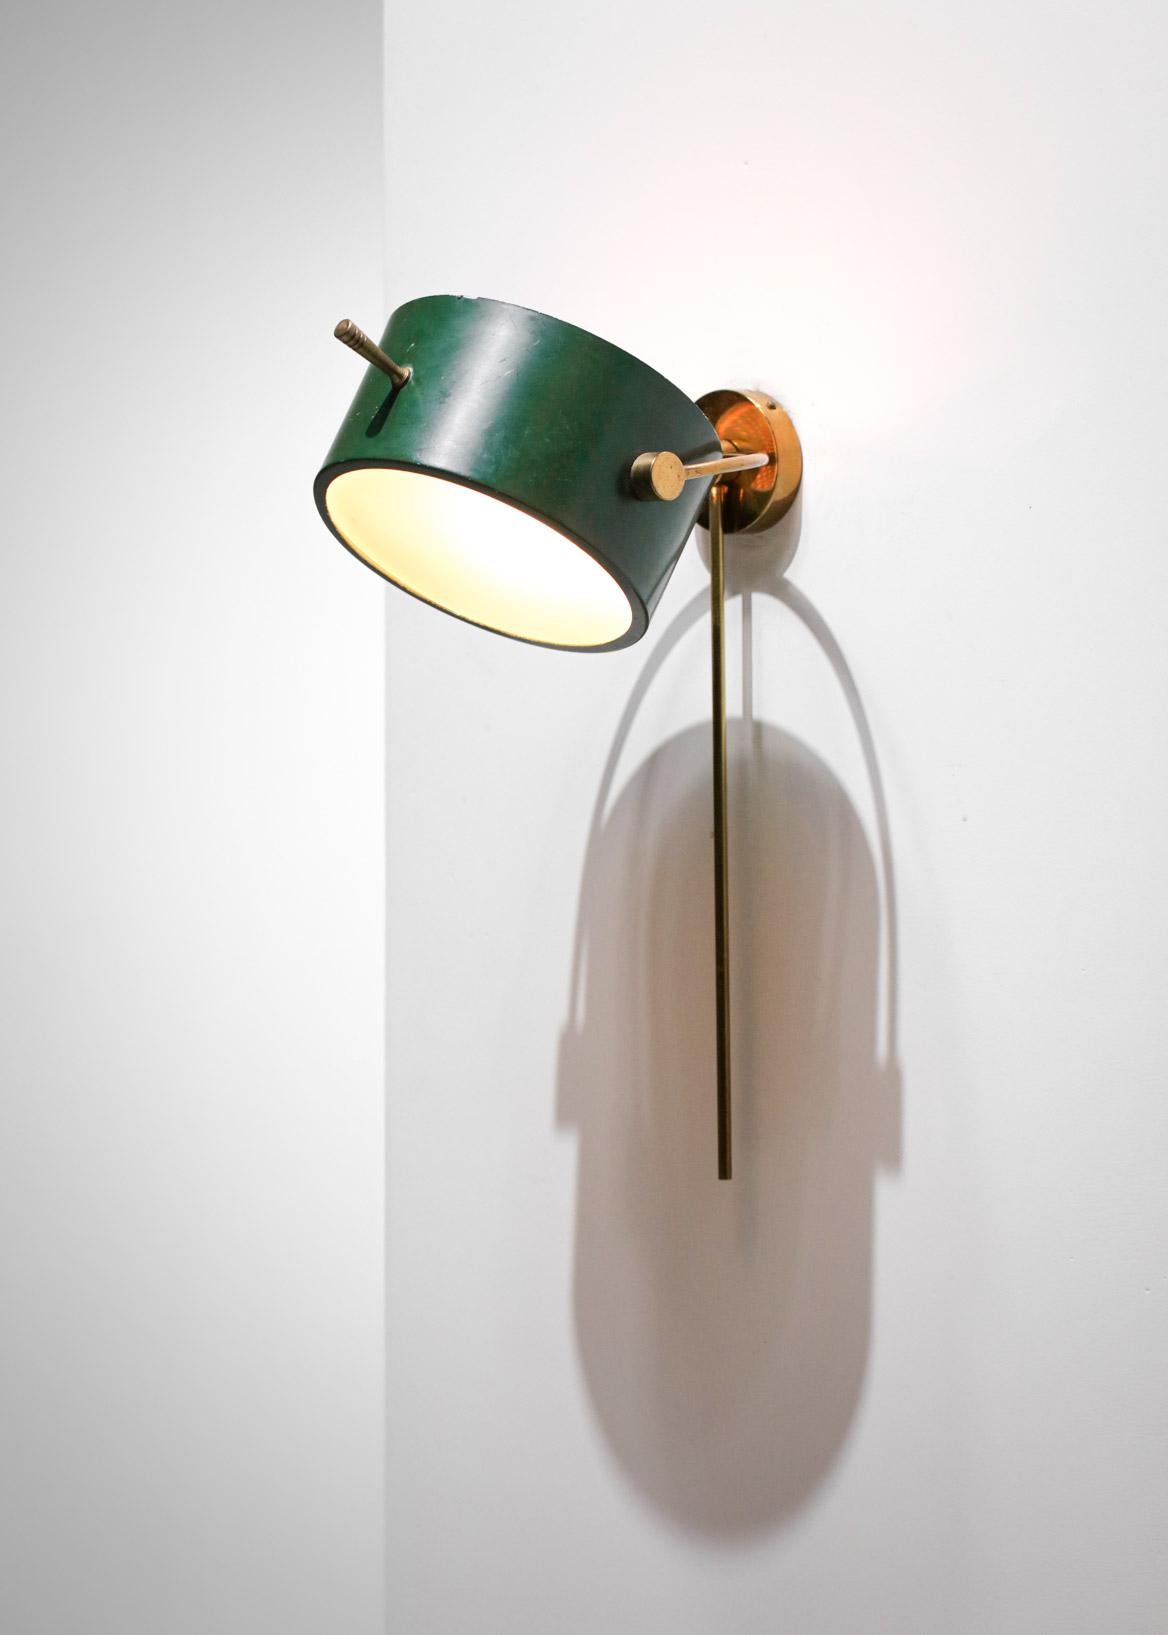 Rare 50's French Wall Lamp by Lunel Dark Green in Style of Mathieu Mategot, F420 2